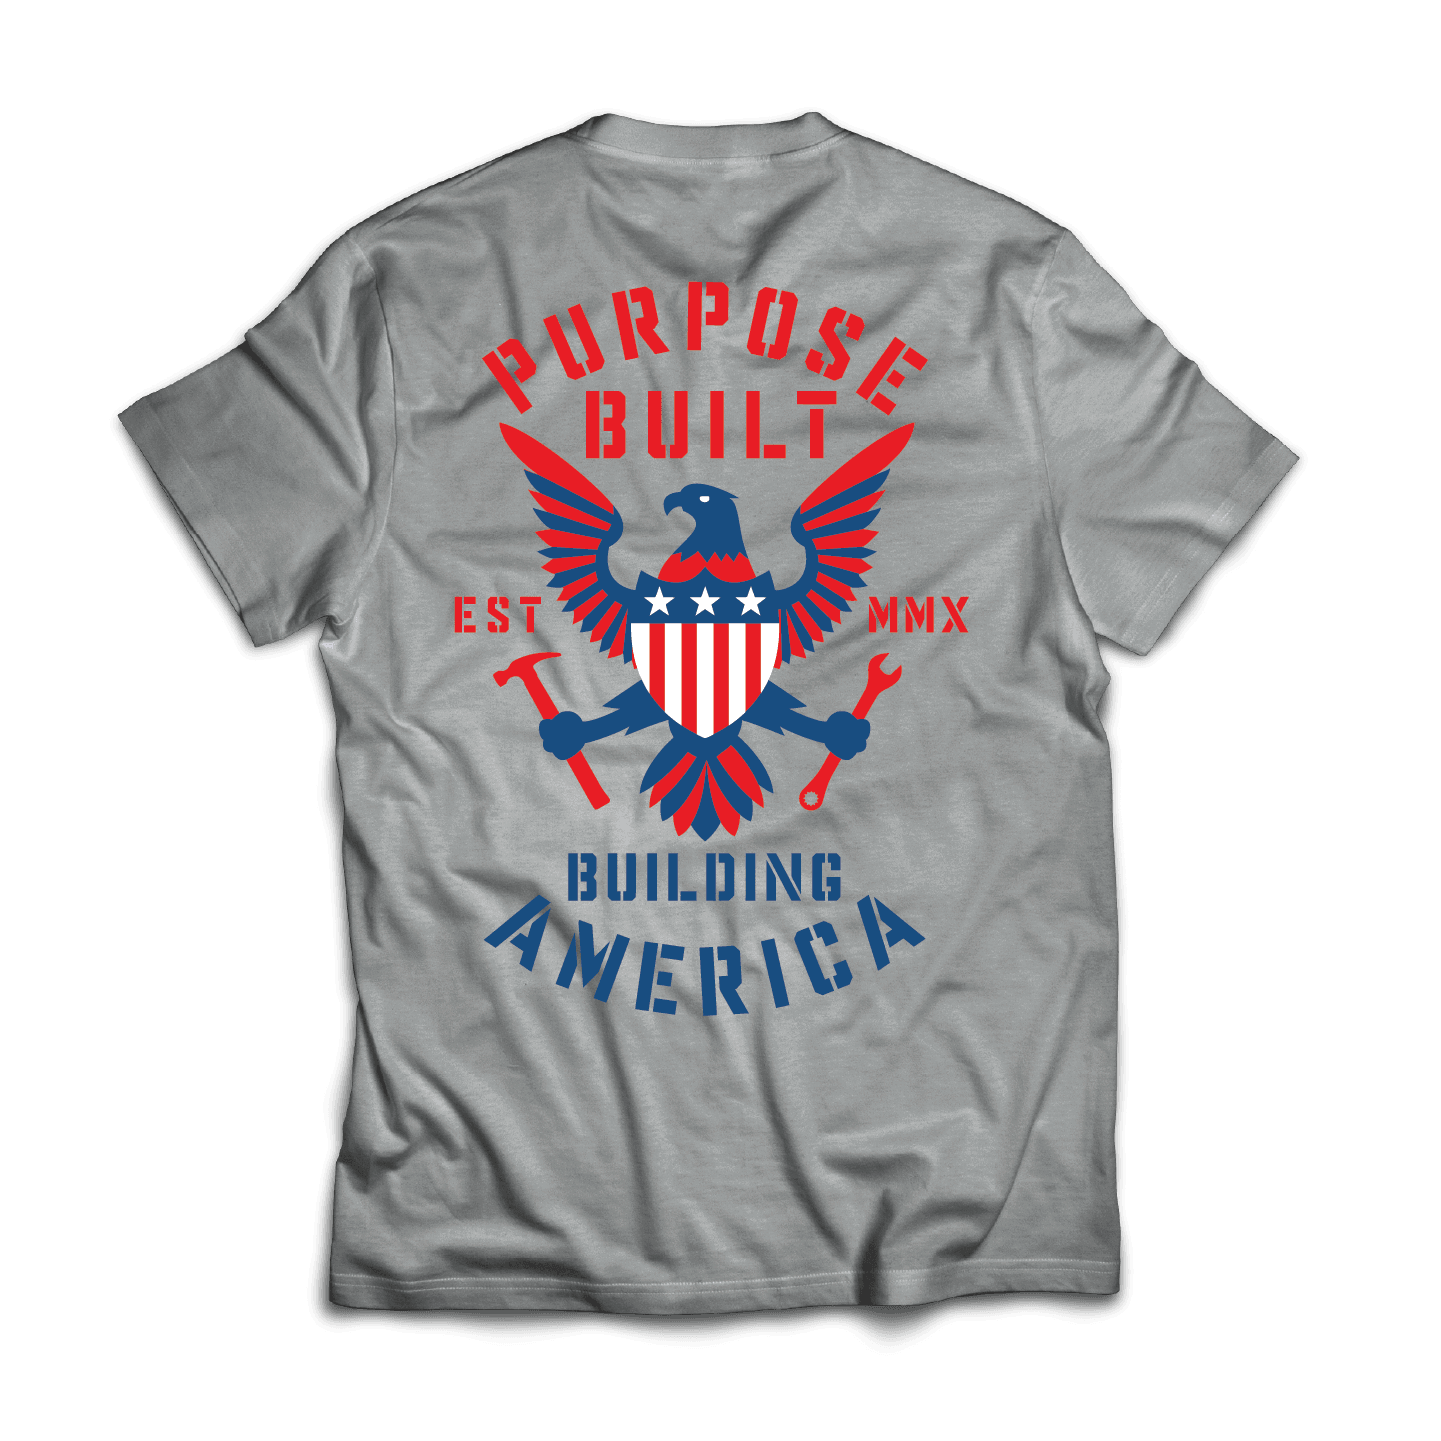 Built on America Tee, Grey - Purpose-Built / Home of the Trades